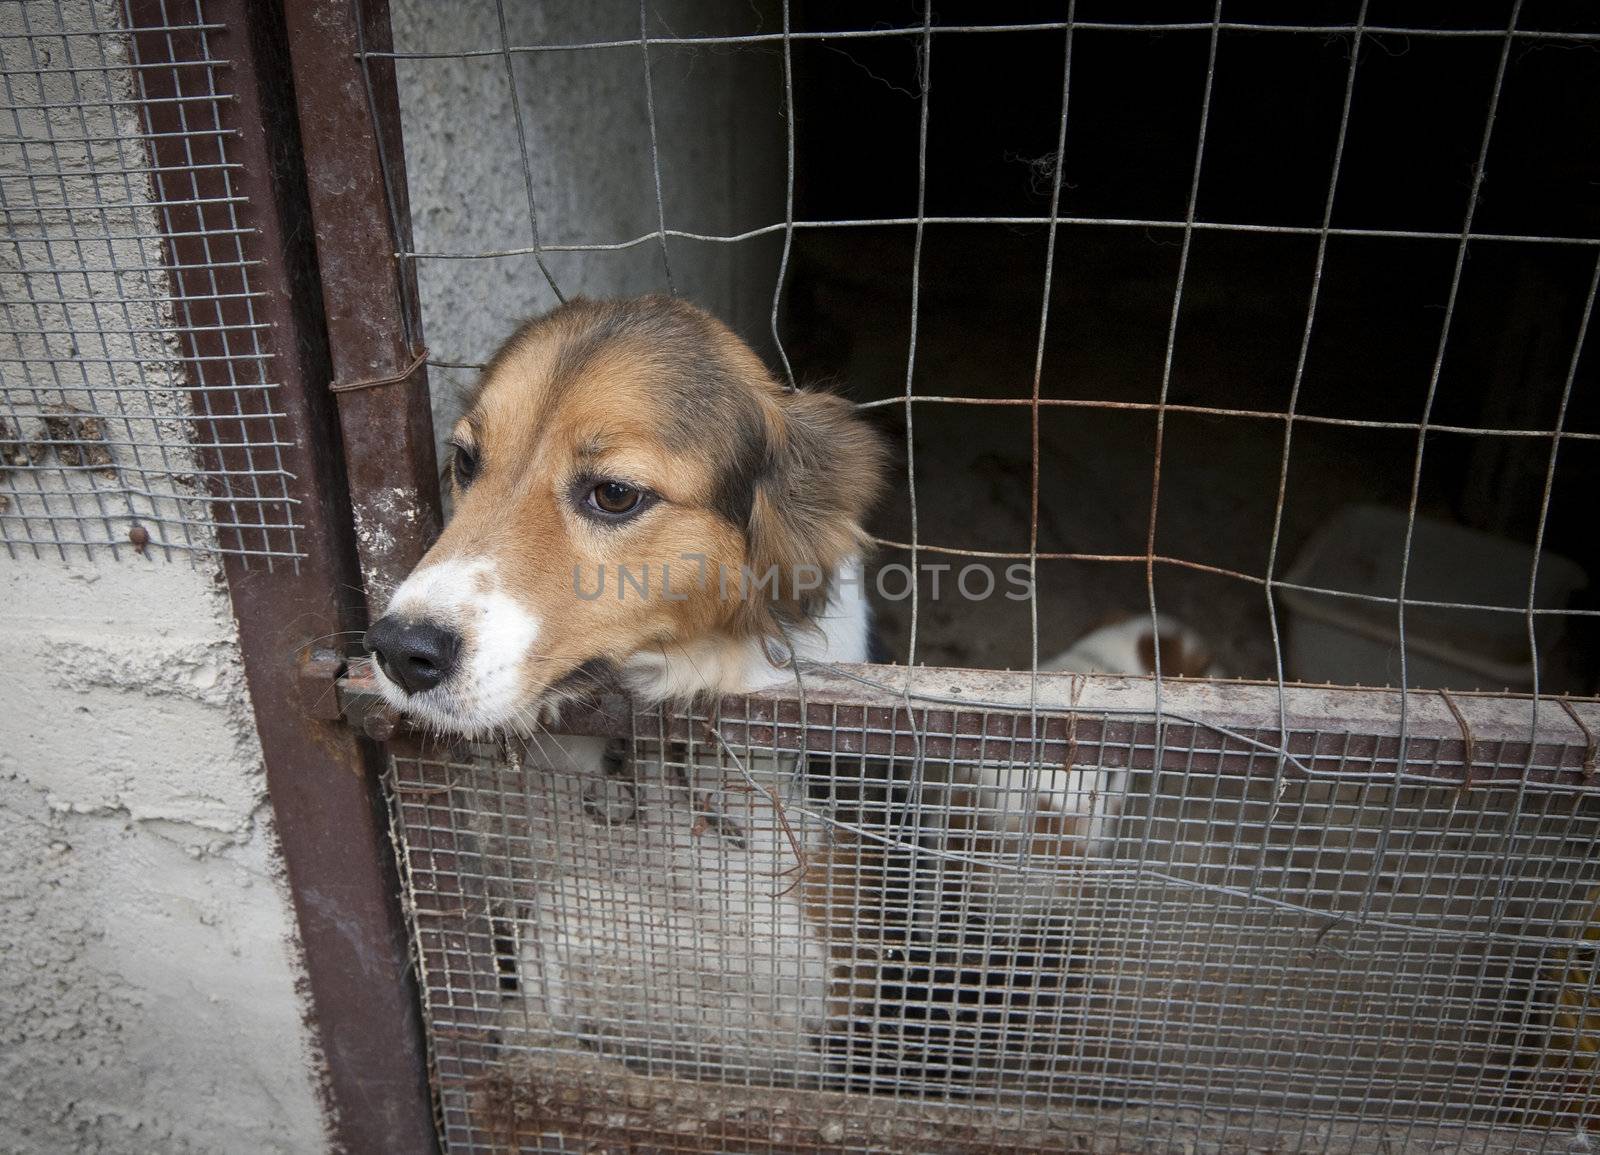 Cut dog behind bars by ABCDK